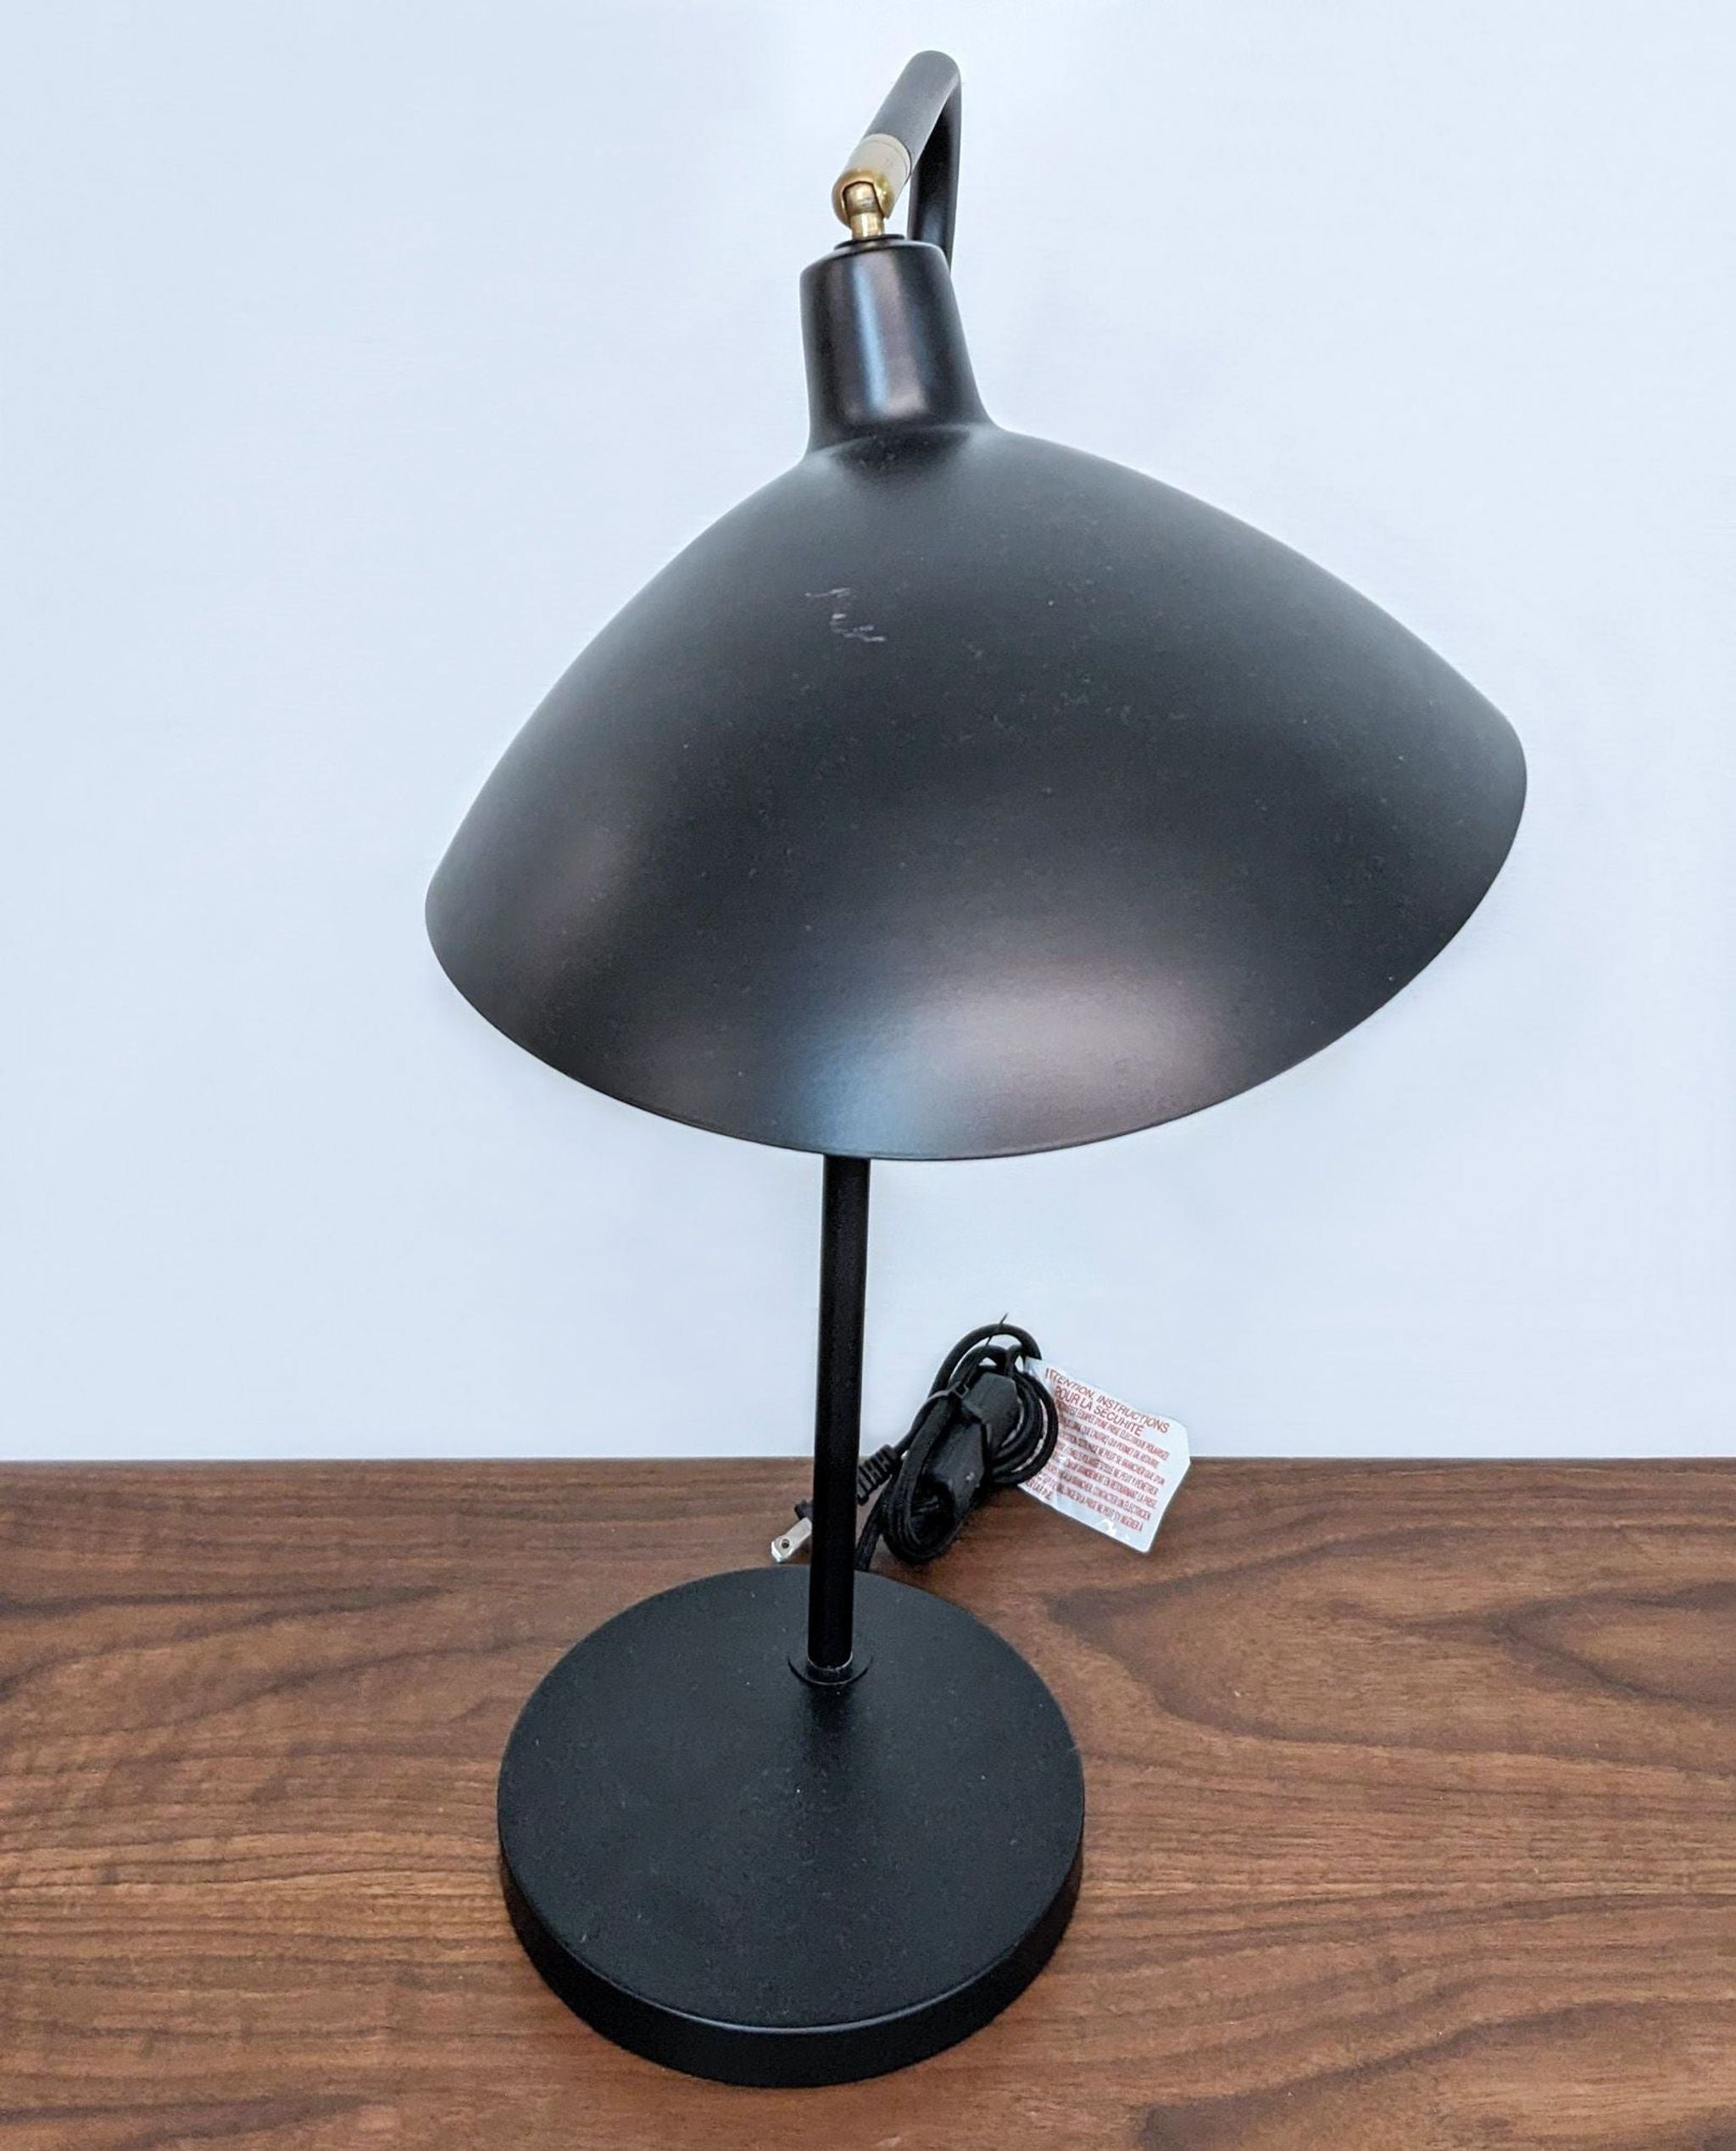 A black Safavieh table lamp featuring a golden interior, adjustable angle, placed on a brown surface with white backdrop.